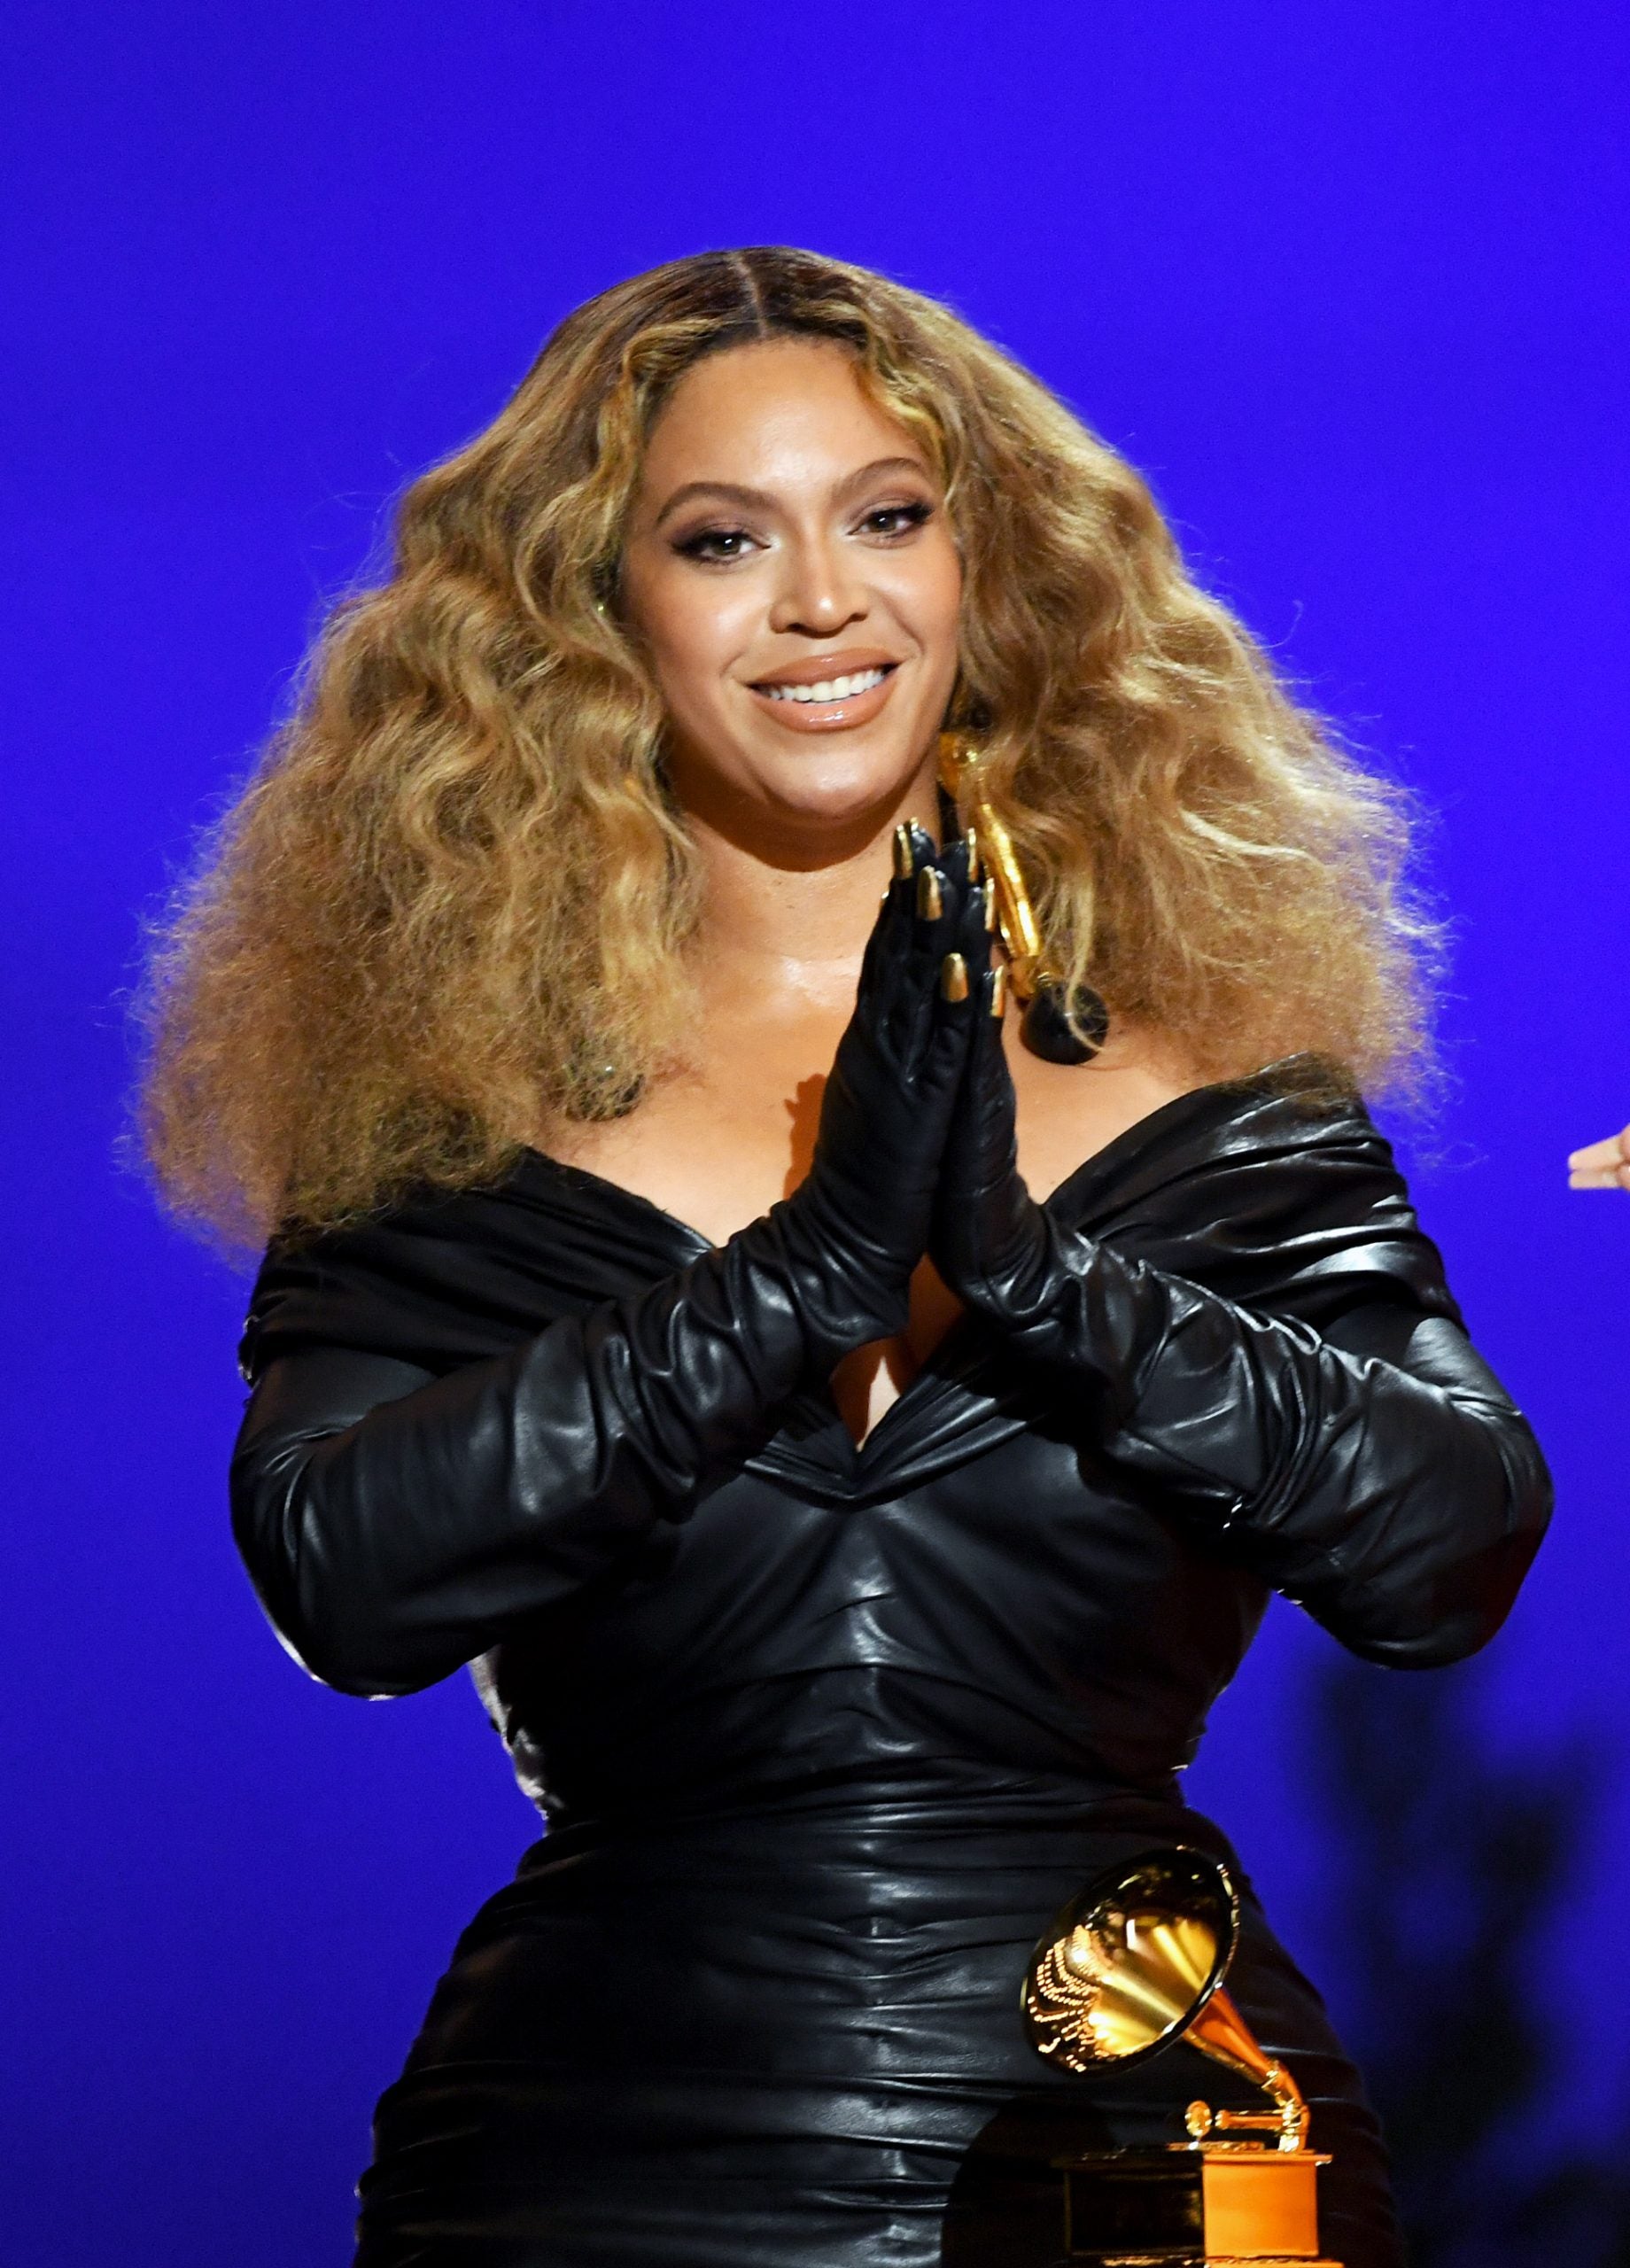 Beyoncé Makes History With Grammy Nomination For Best Dance/Electronic Album